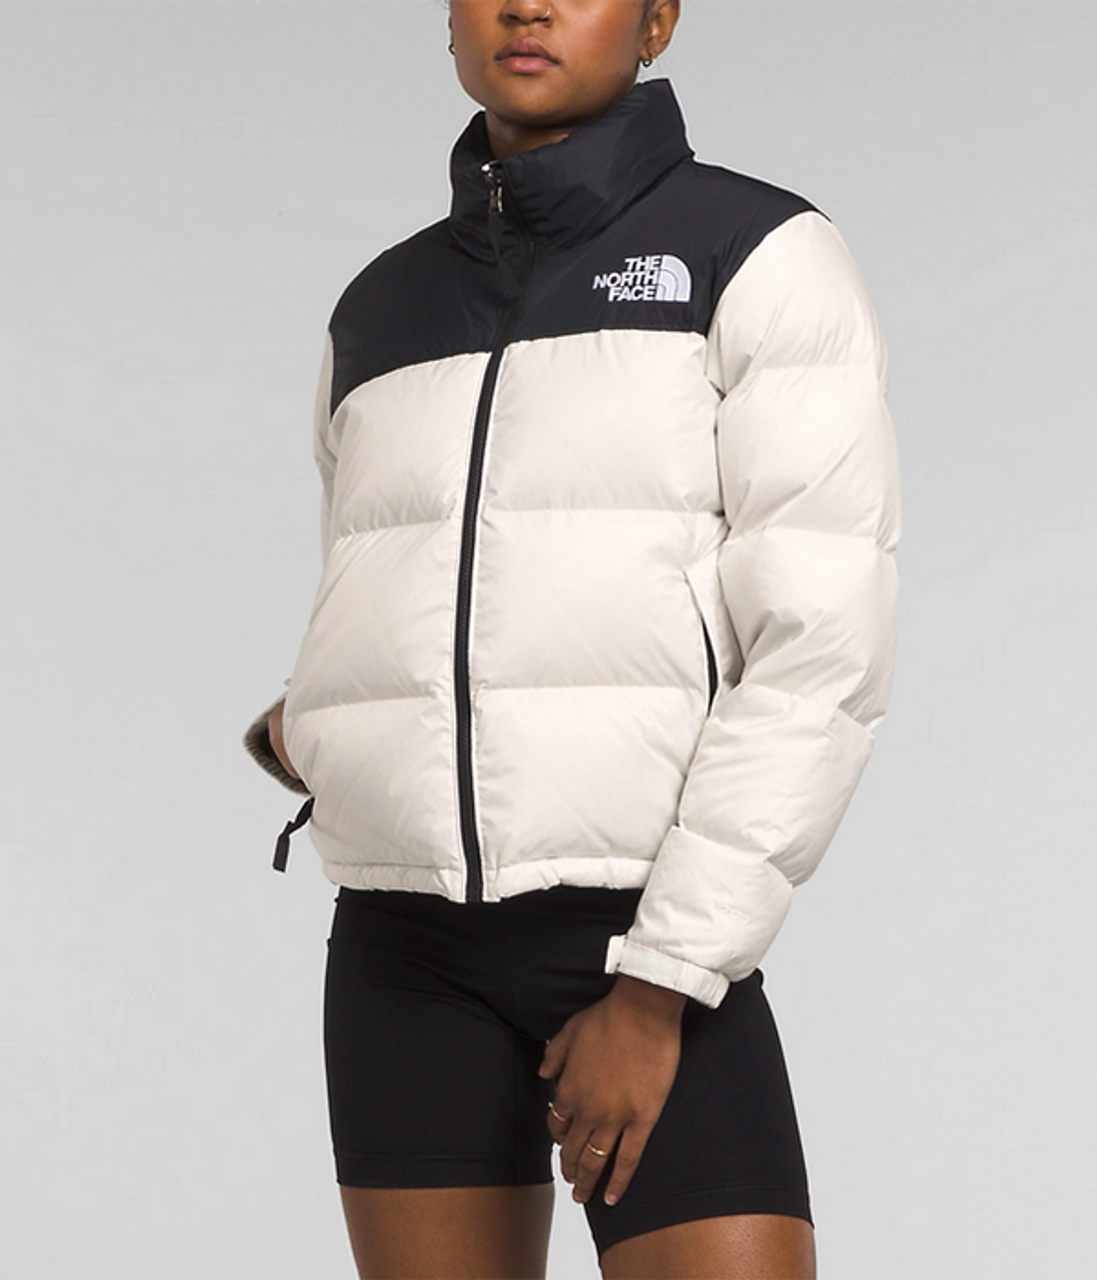 THE NORTH FACE JACKET WHITE NJ3NN64 純正売り - clinicaviterbo.com.br